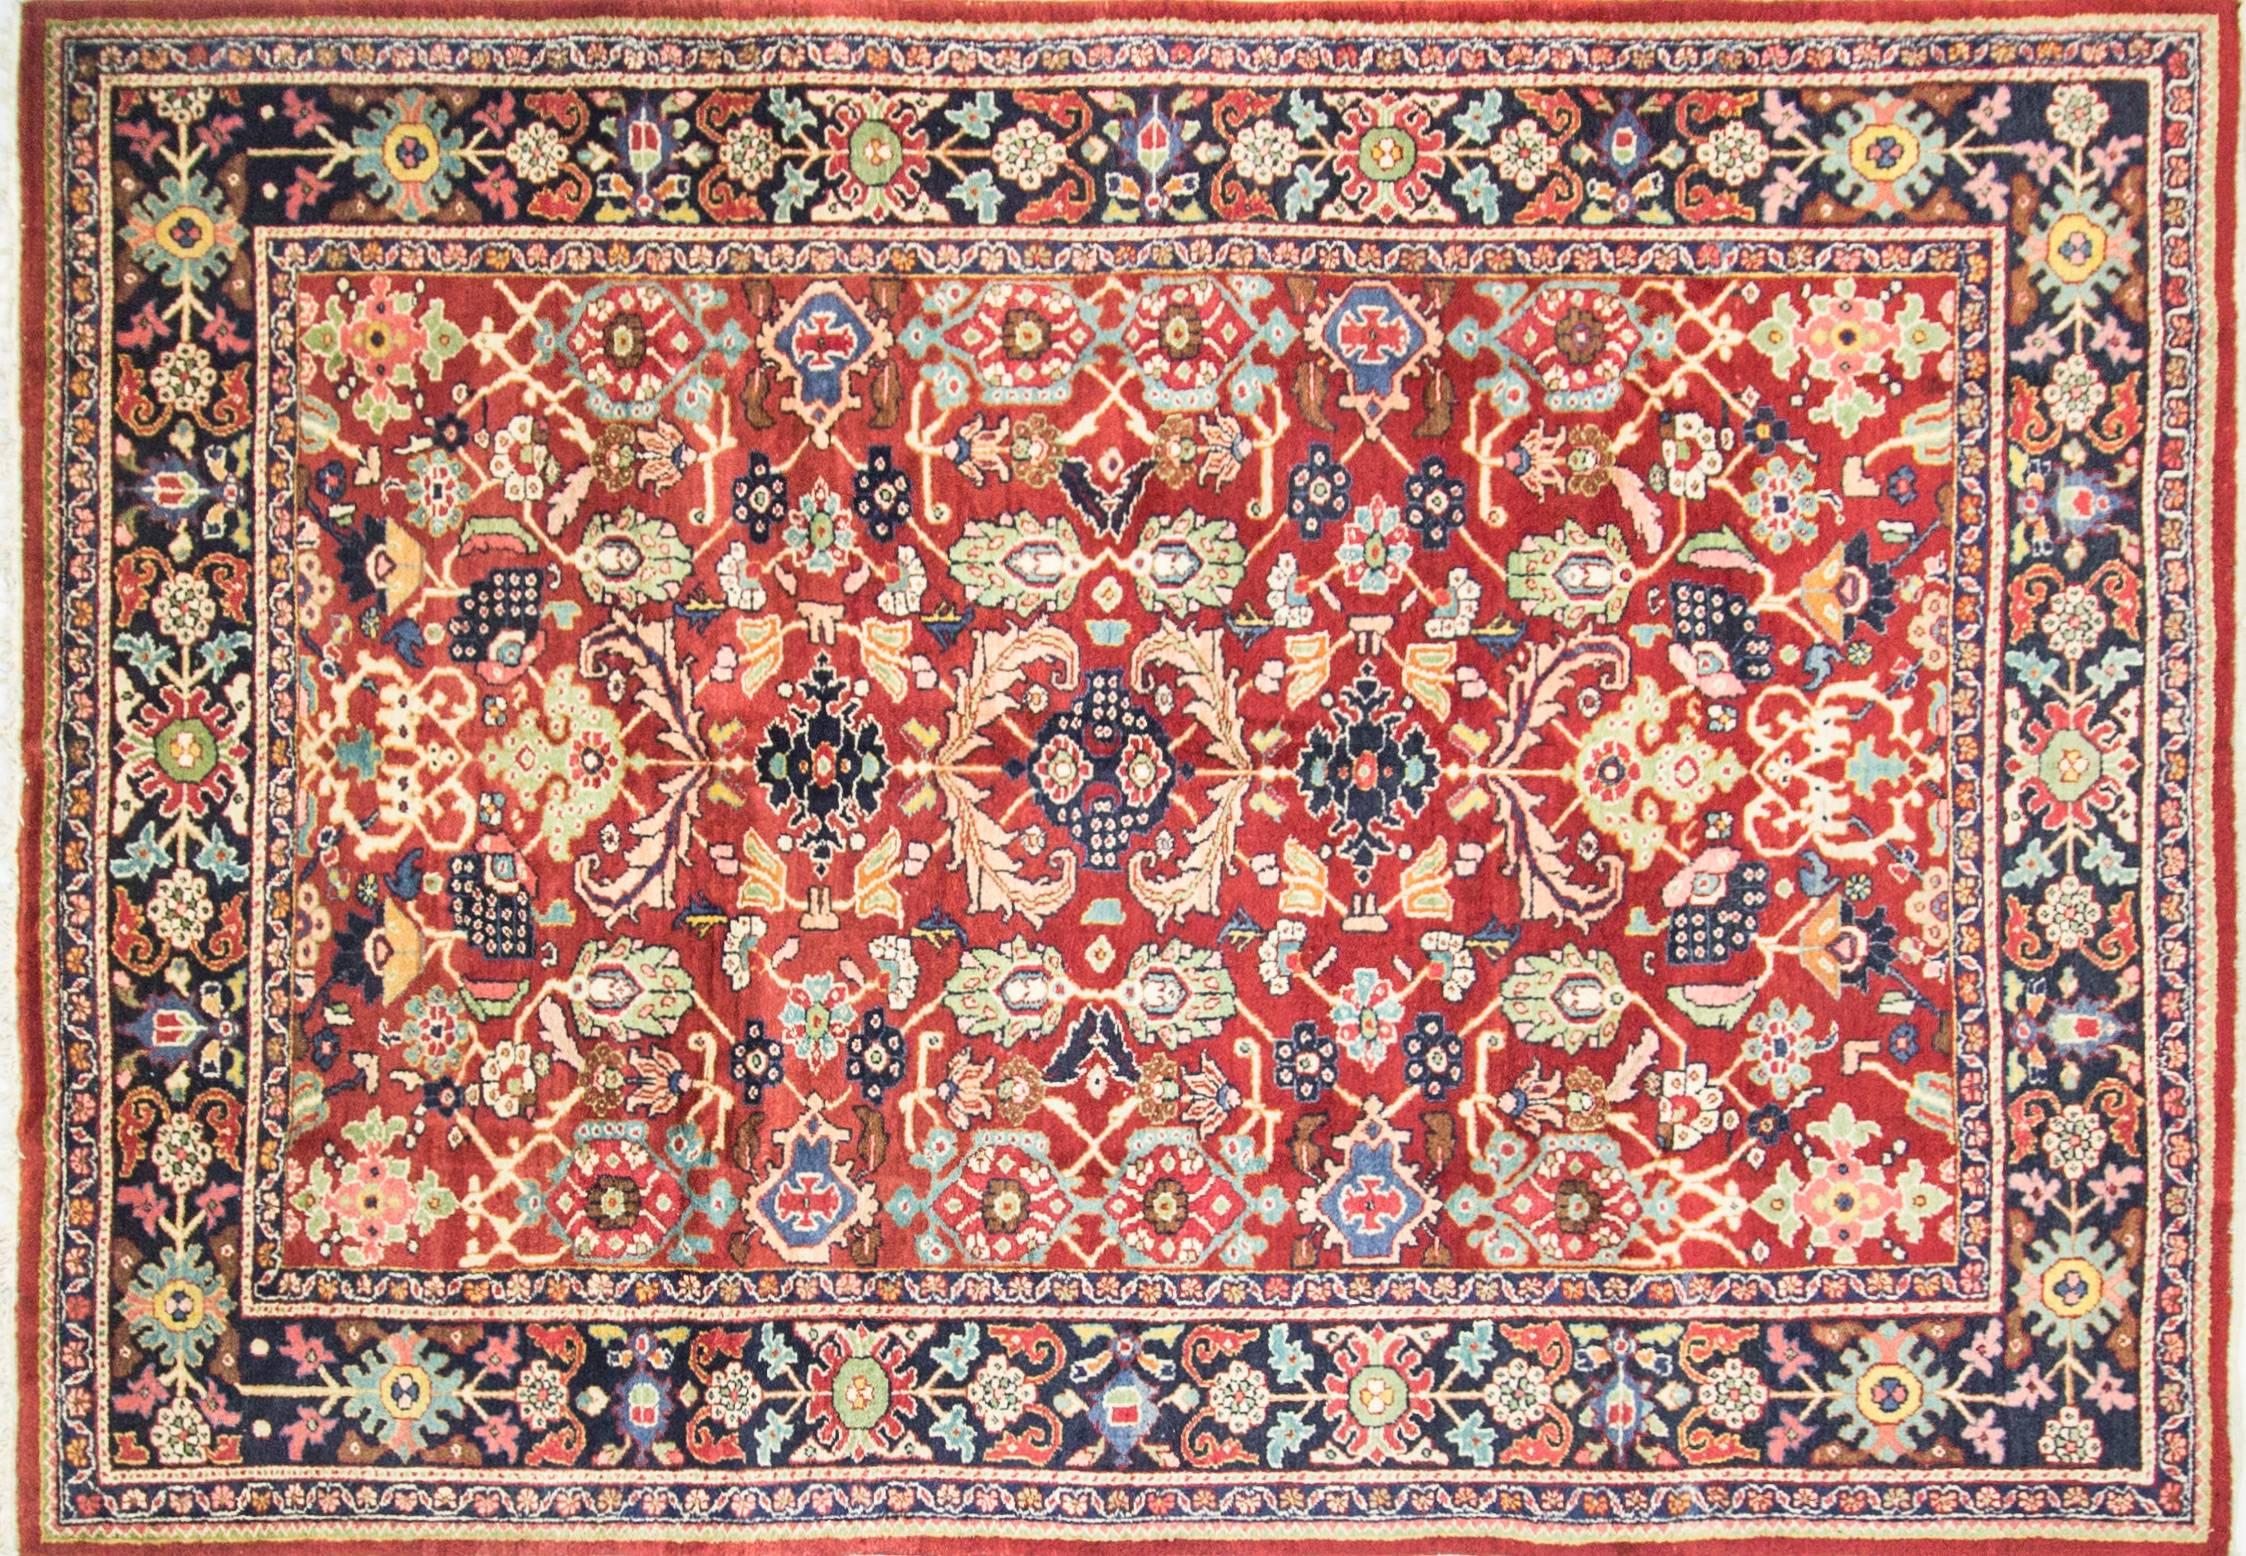 This is an authentic handmade rug. It was made in Persia, circa 1940s or before. 
 
 The materials are wool pile with cotton foundation. The colors are from vegetable dyes, and the general pattern is geometric and floral design inside two